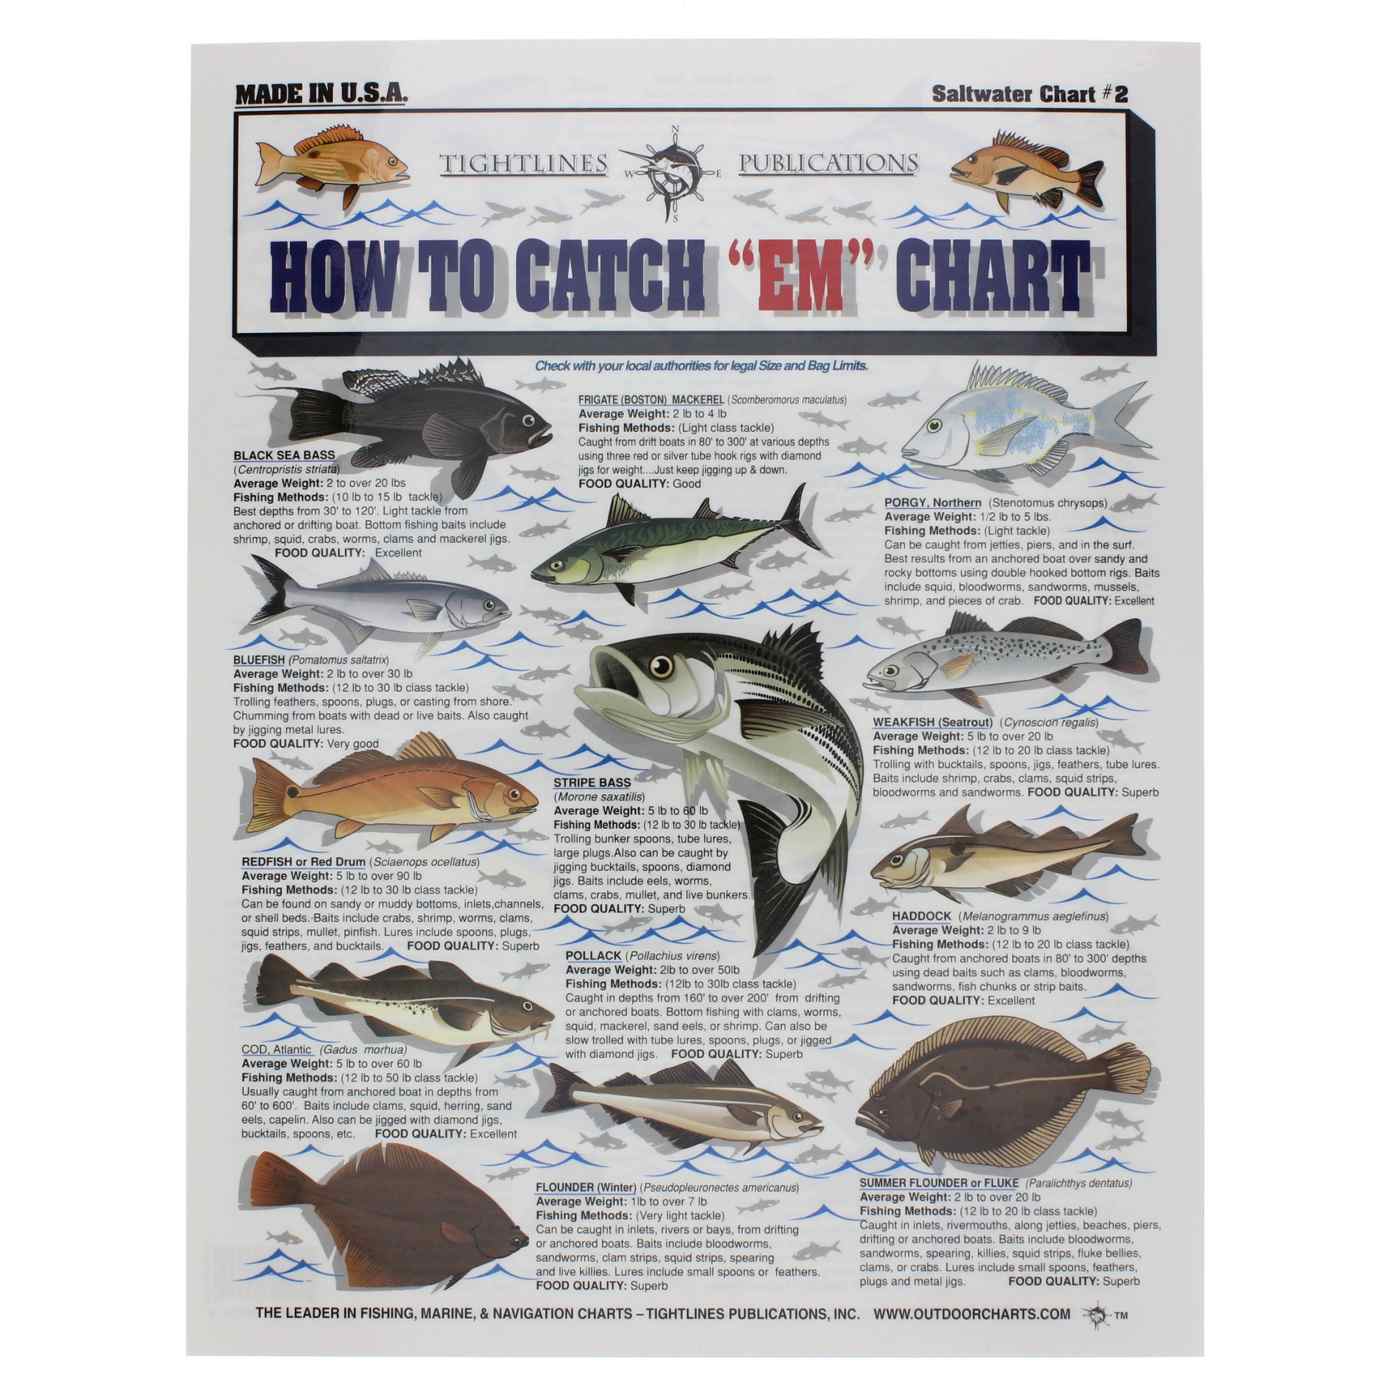 Tightlines Publications "How To Catch Em" Saltwater Fish Chart #2; image 1 of 2